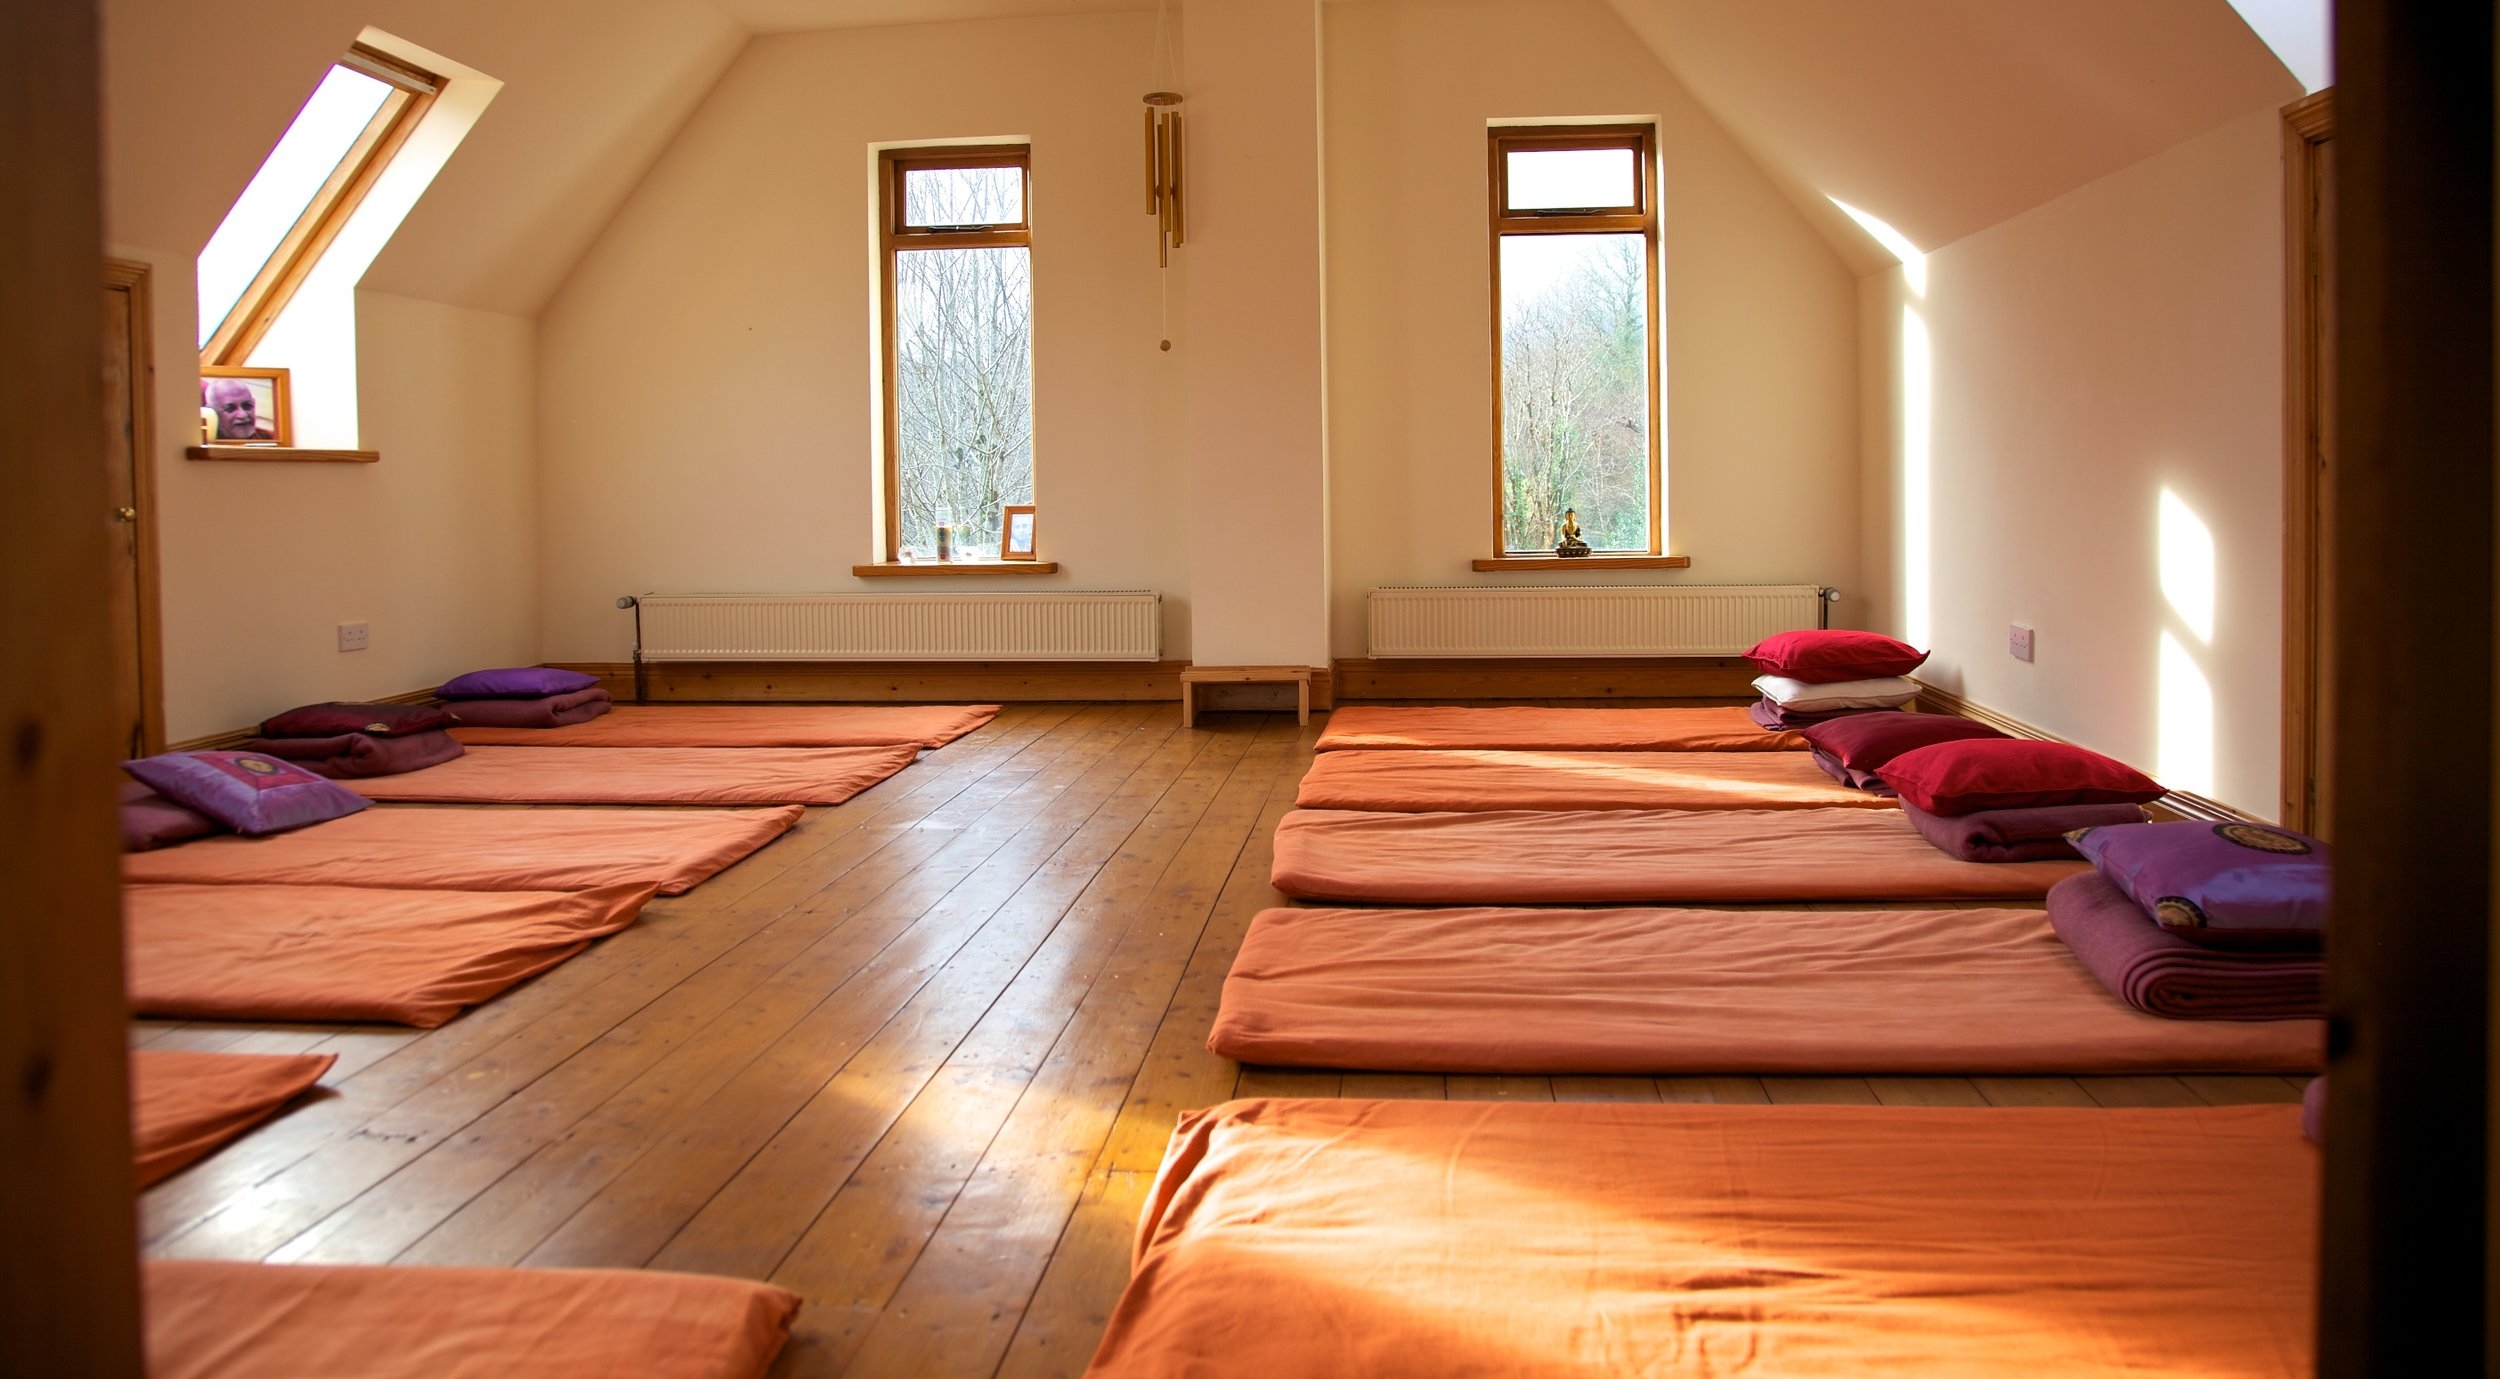  The Yoga Room in the Kenmare Yoga Centre Rusheens, Ballygriffin 